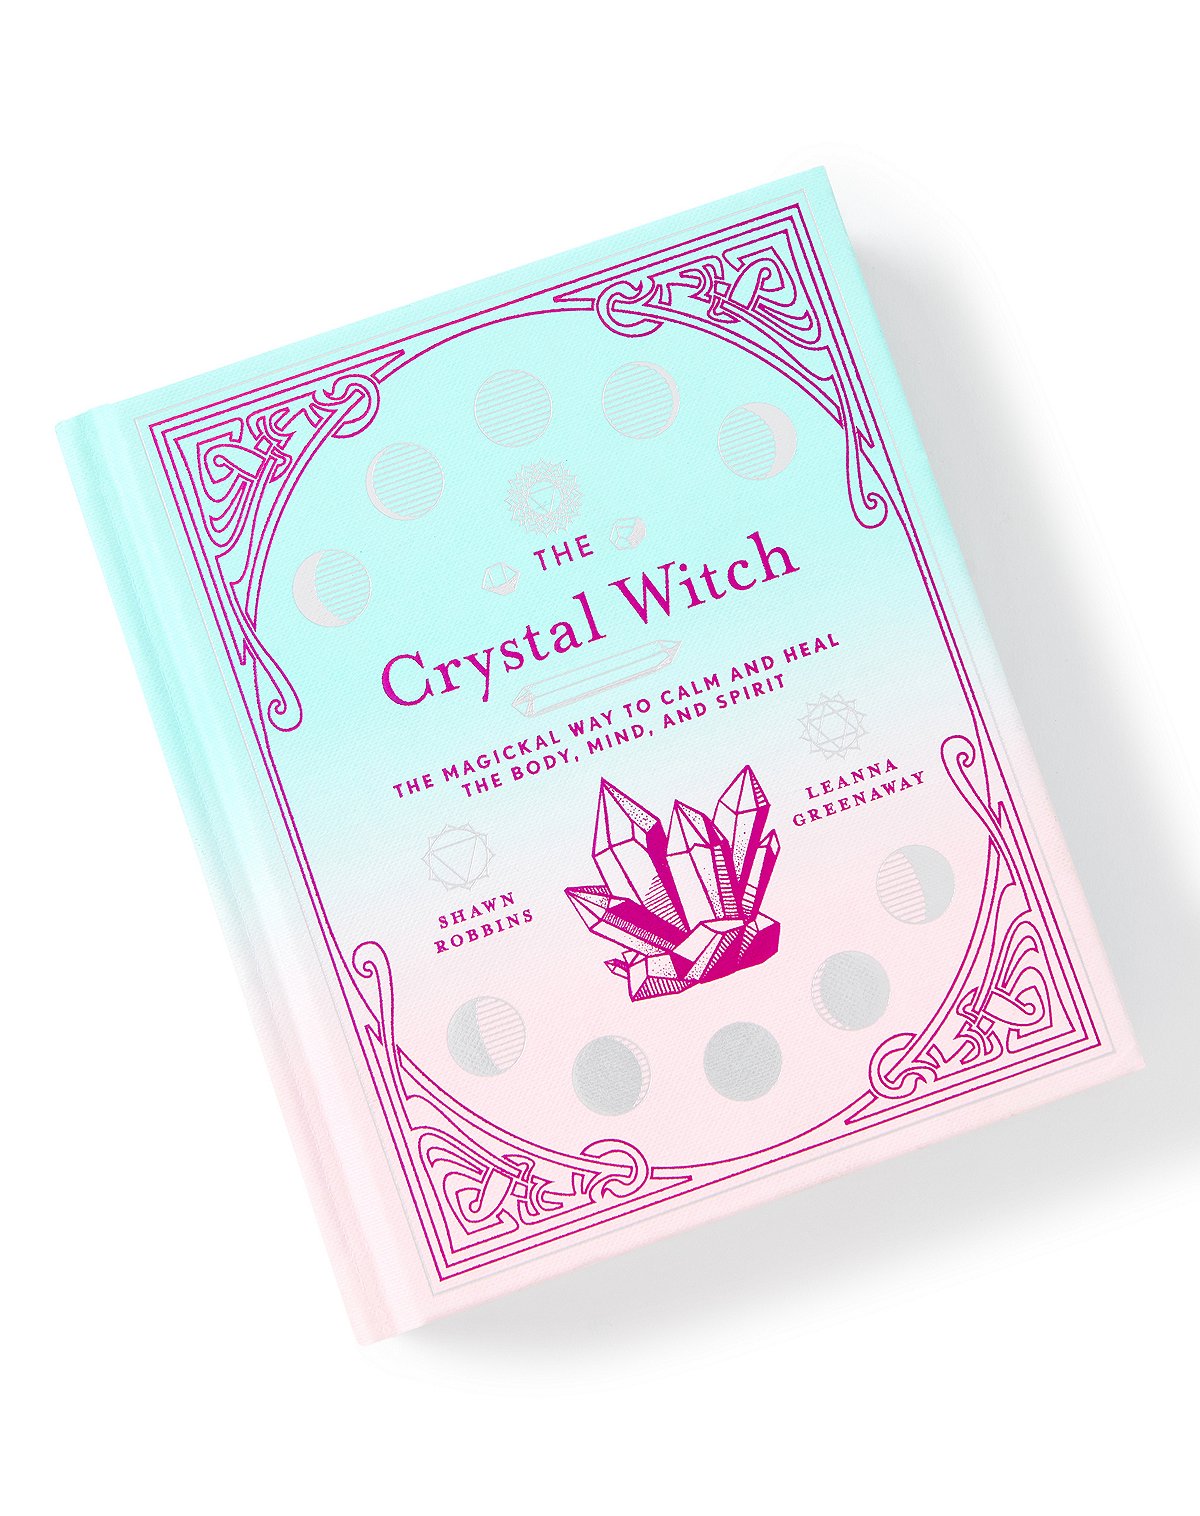 The Crystal Witch Book